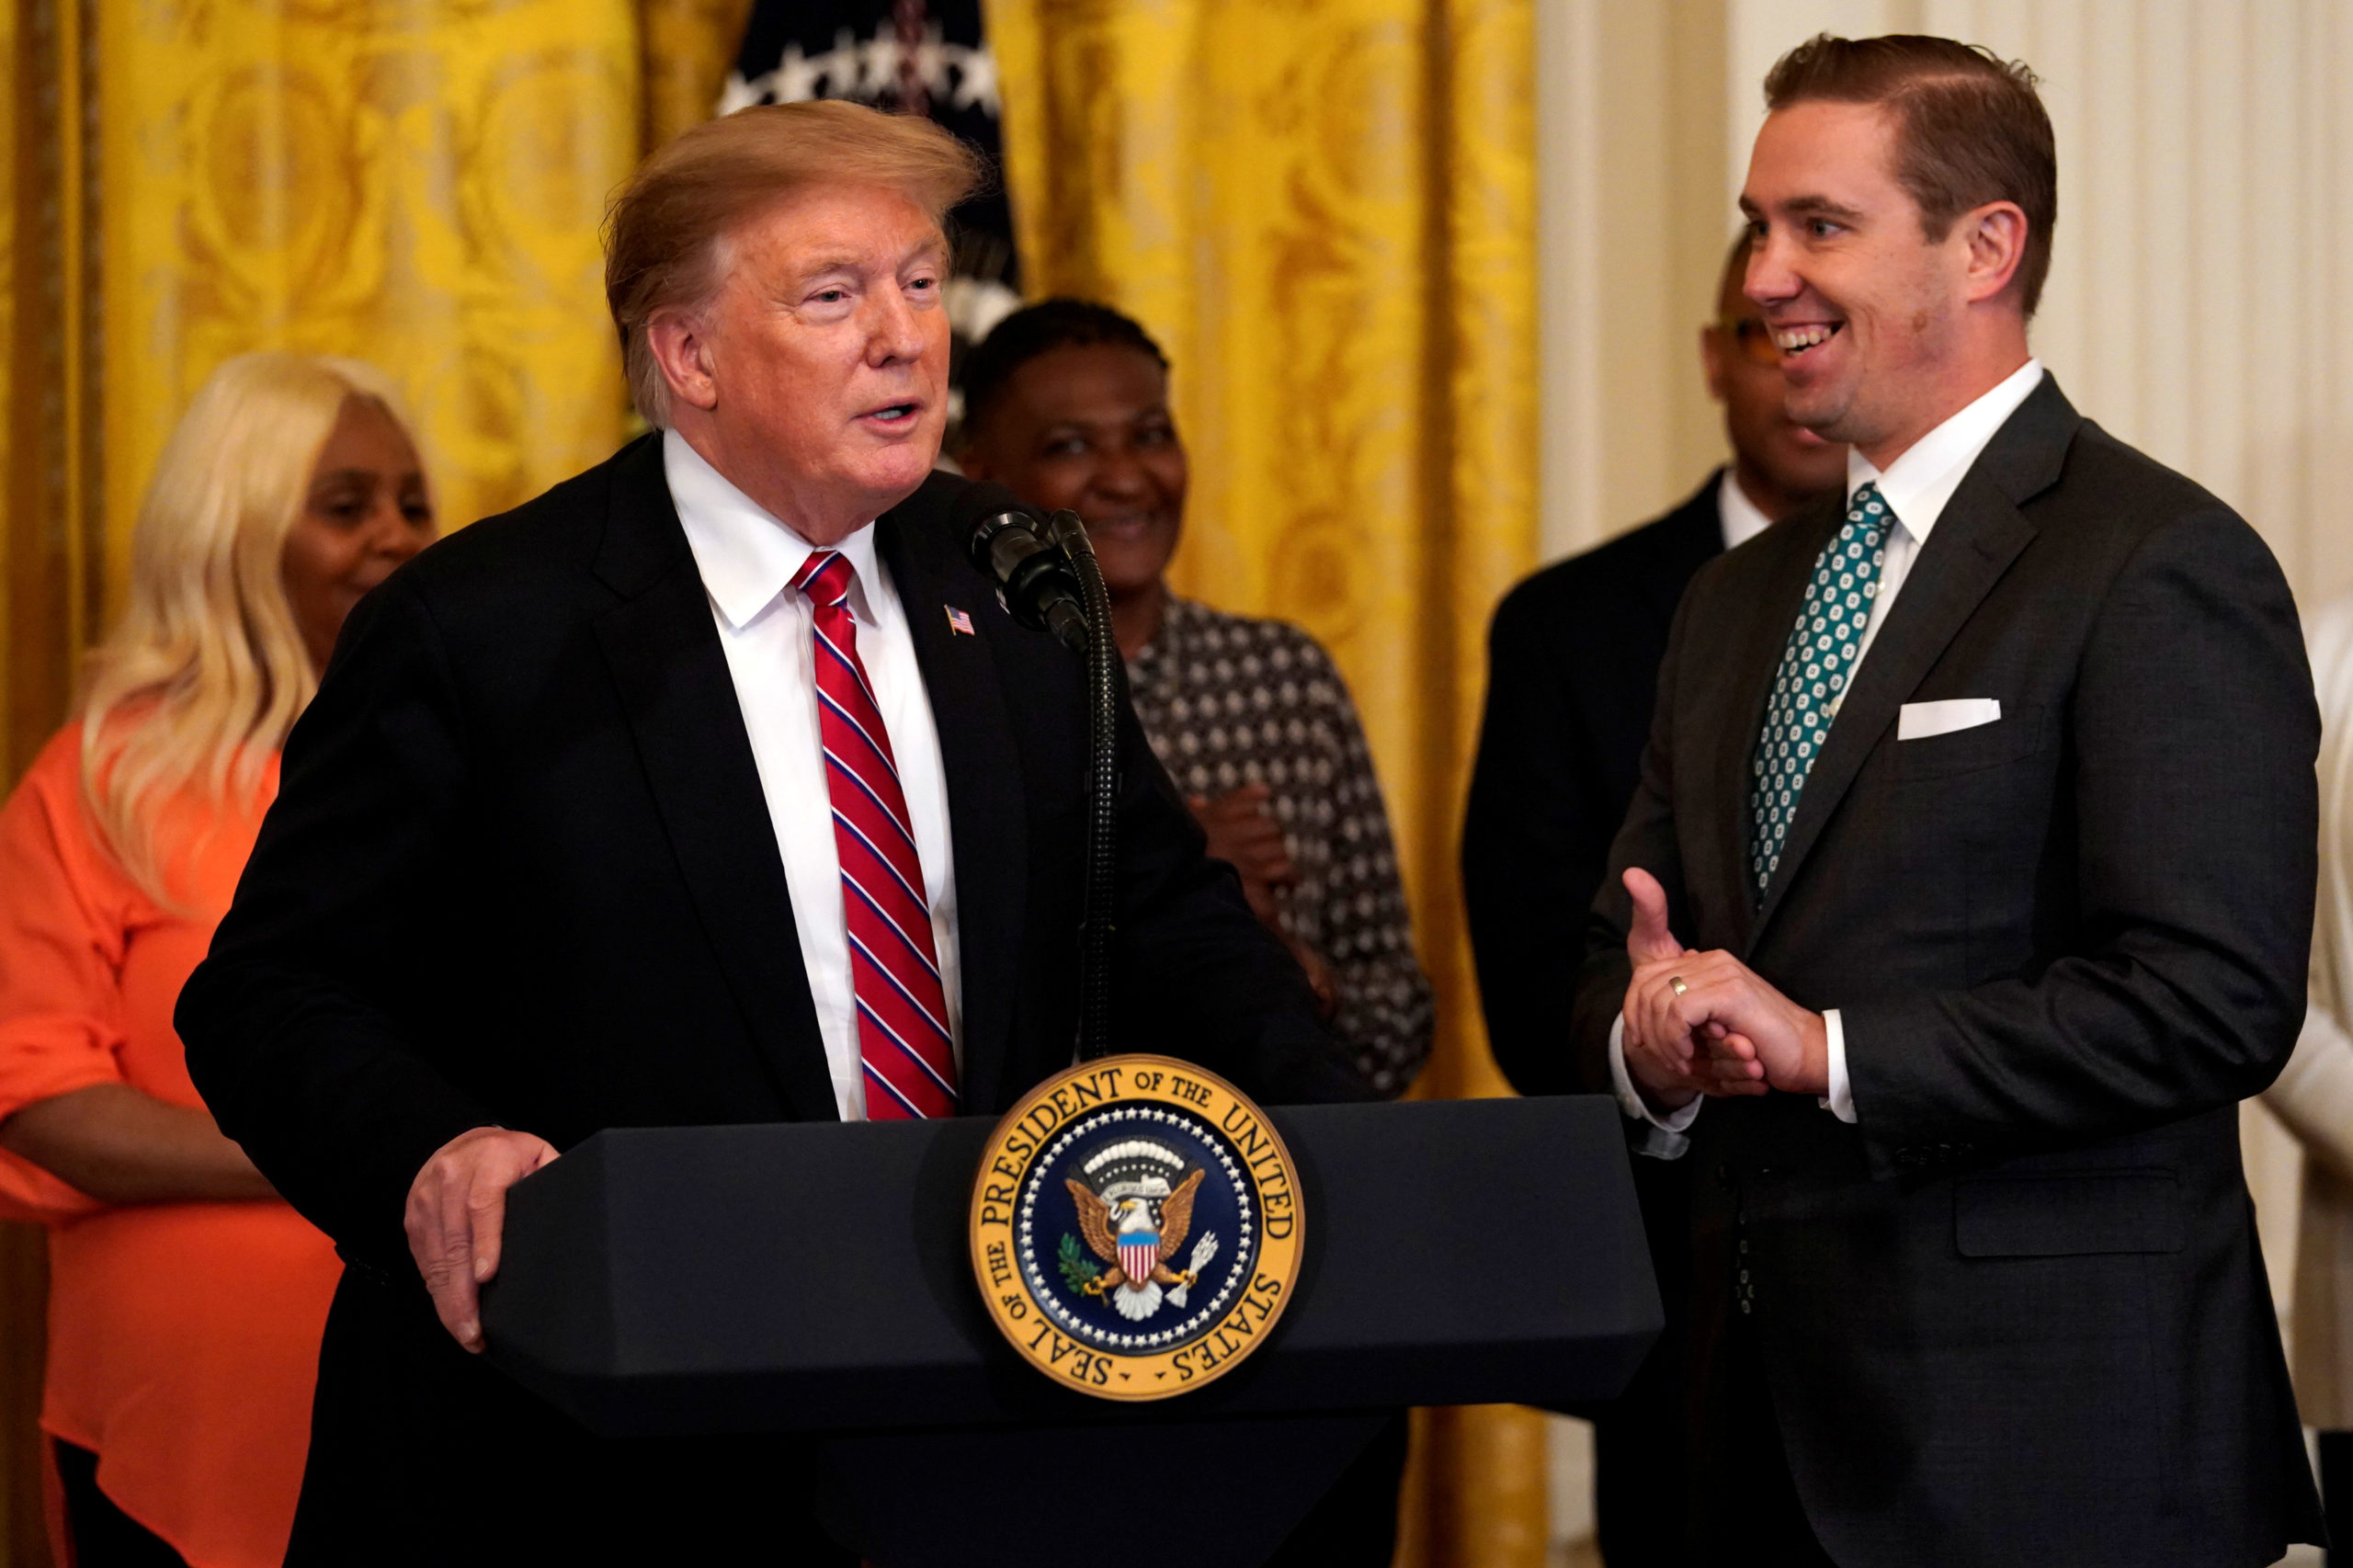 U.S. President Donald Trump speaks next to Shon Hopwood, Georgetown law professor, and convicted felon, who is Tiffany Trump's professor, during the 2019 Prison Reform Summit and First Step Act Celebration at the White House in Washington, U.S., April 1, 2019. REUTERS/Yuri Gripas